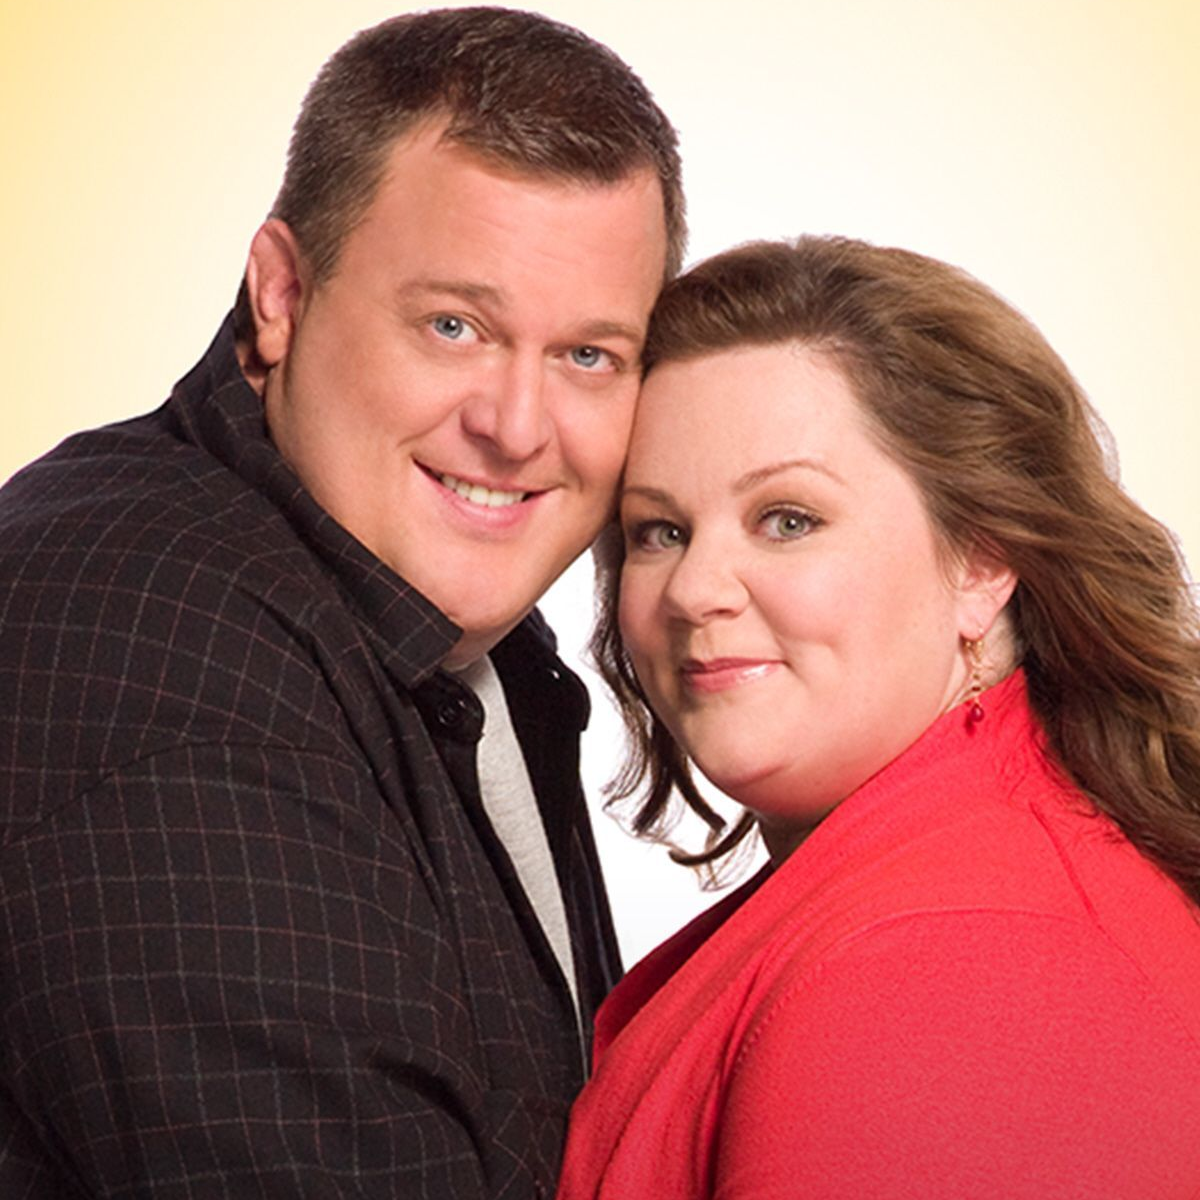 S04E09: Mike & Molly's Excellent Adventure